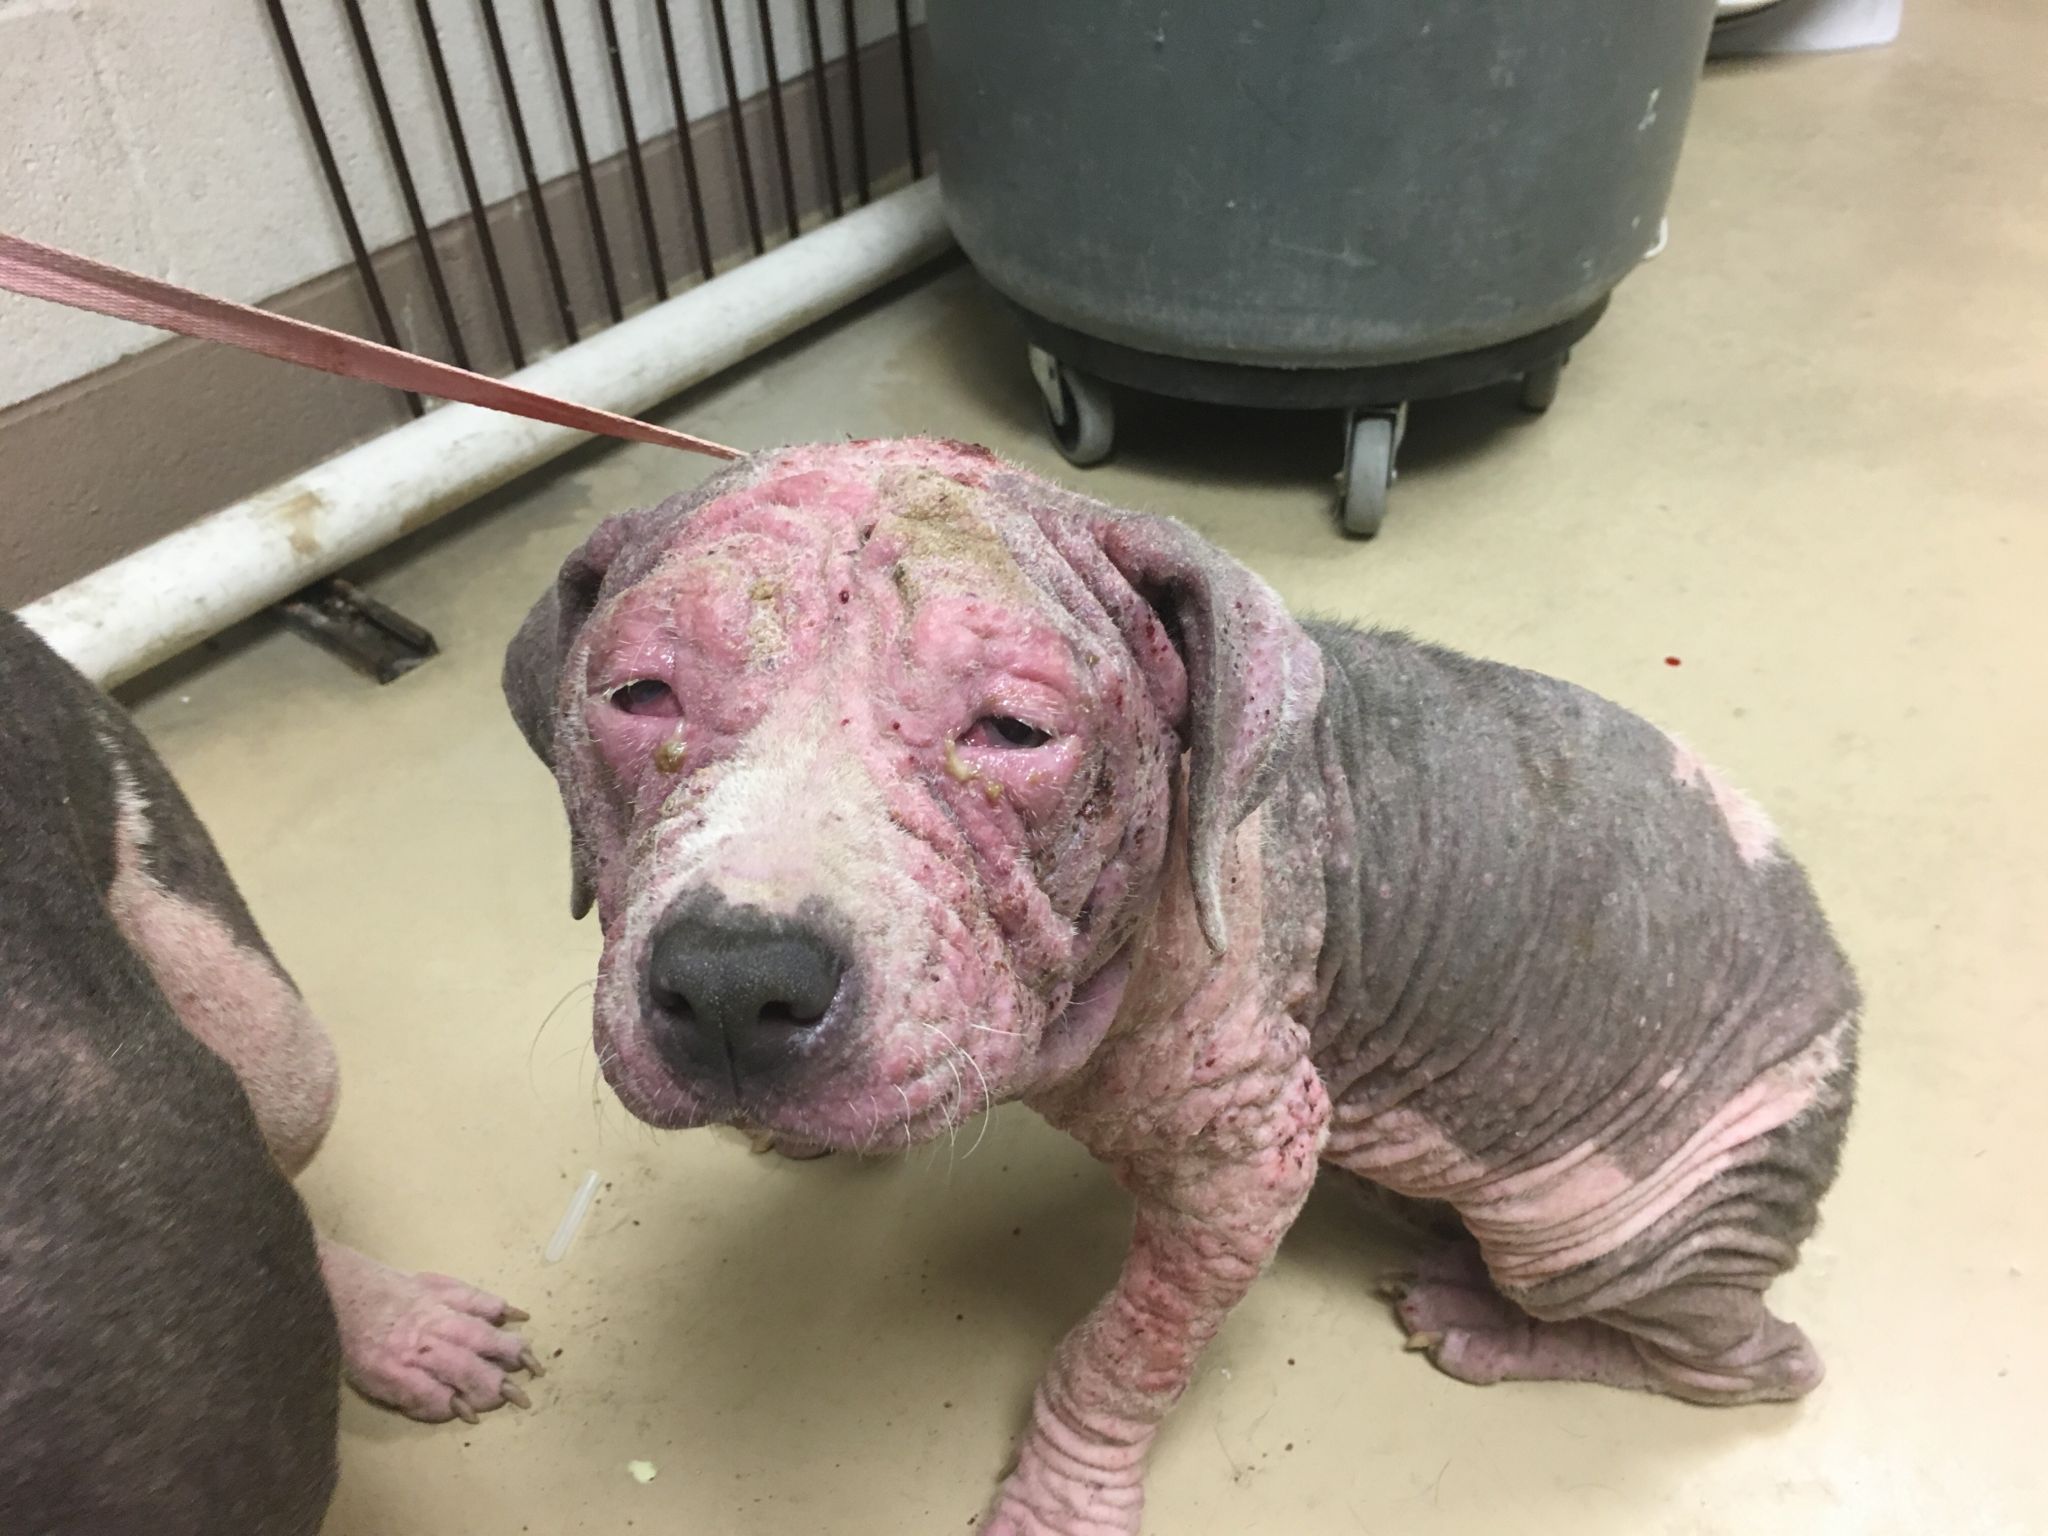 Horribly abused dogs are recovering at Texas animal rescue organization